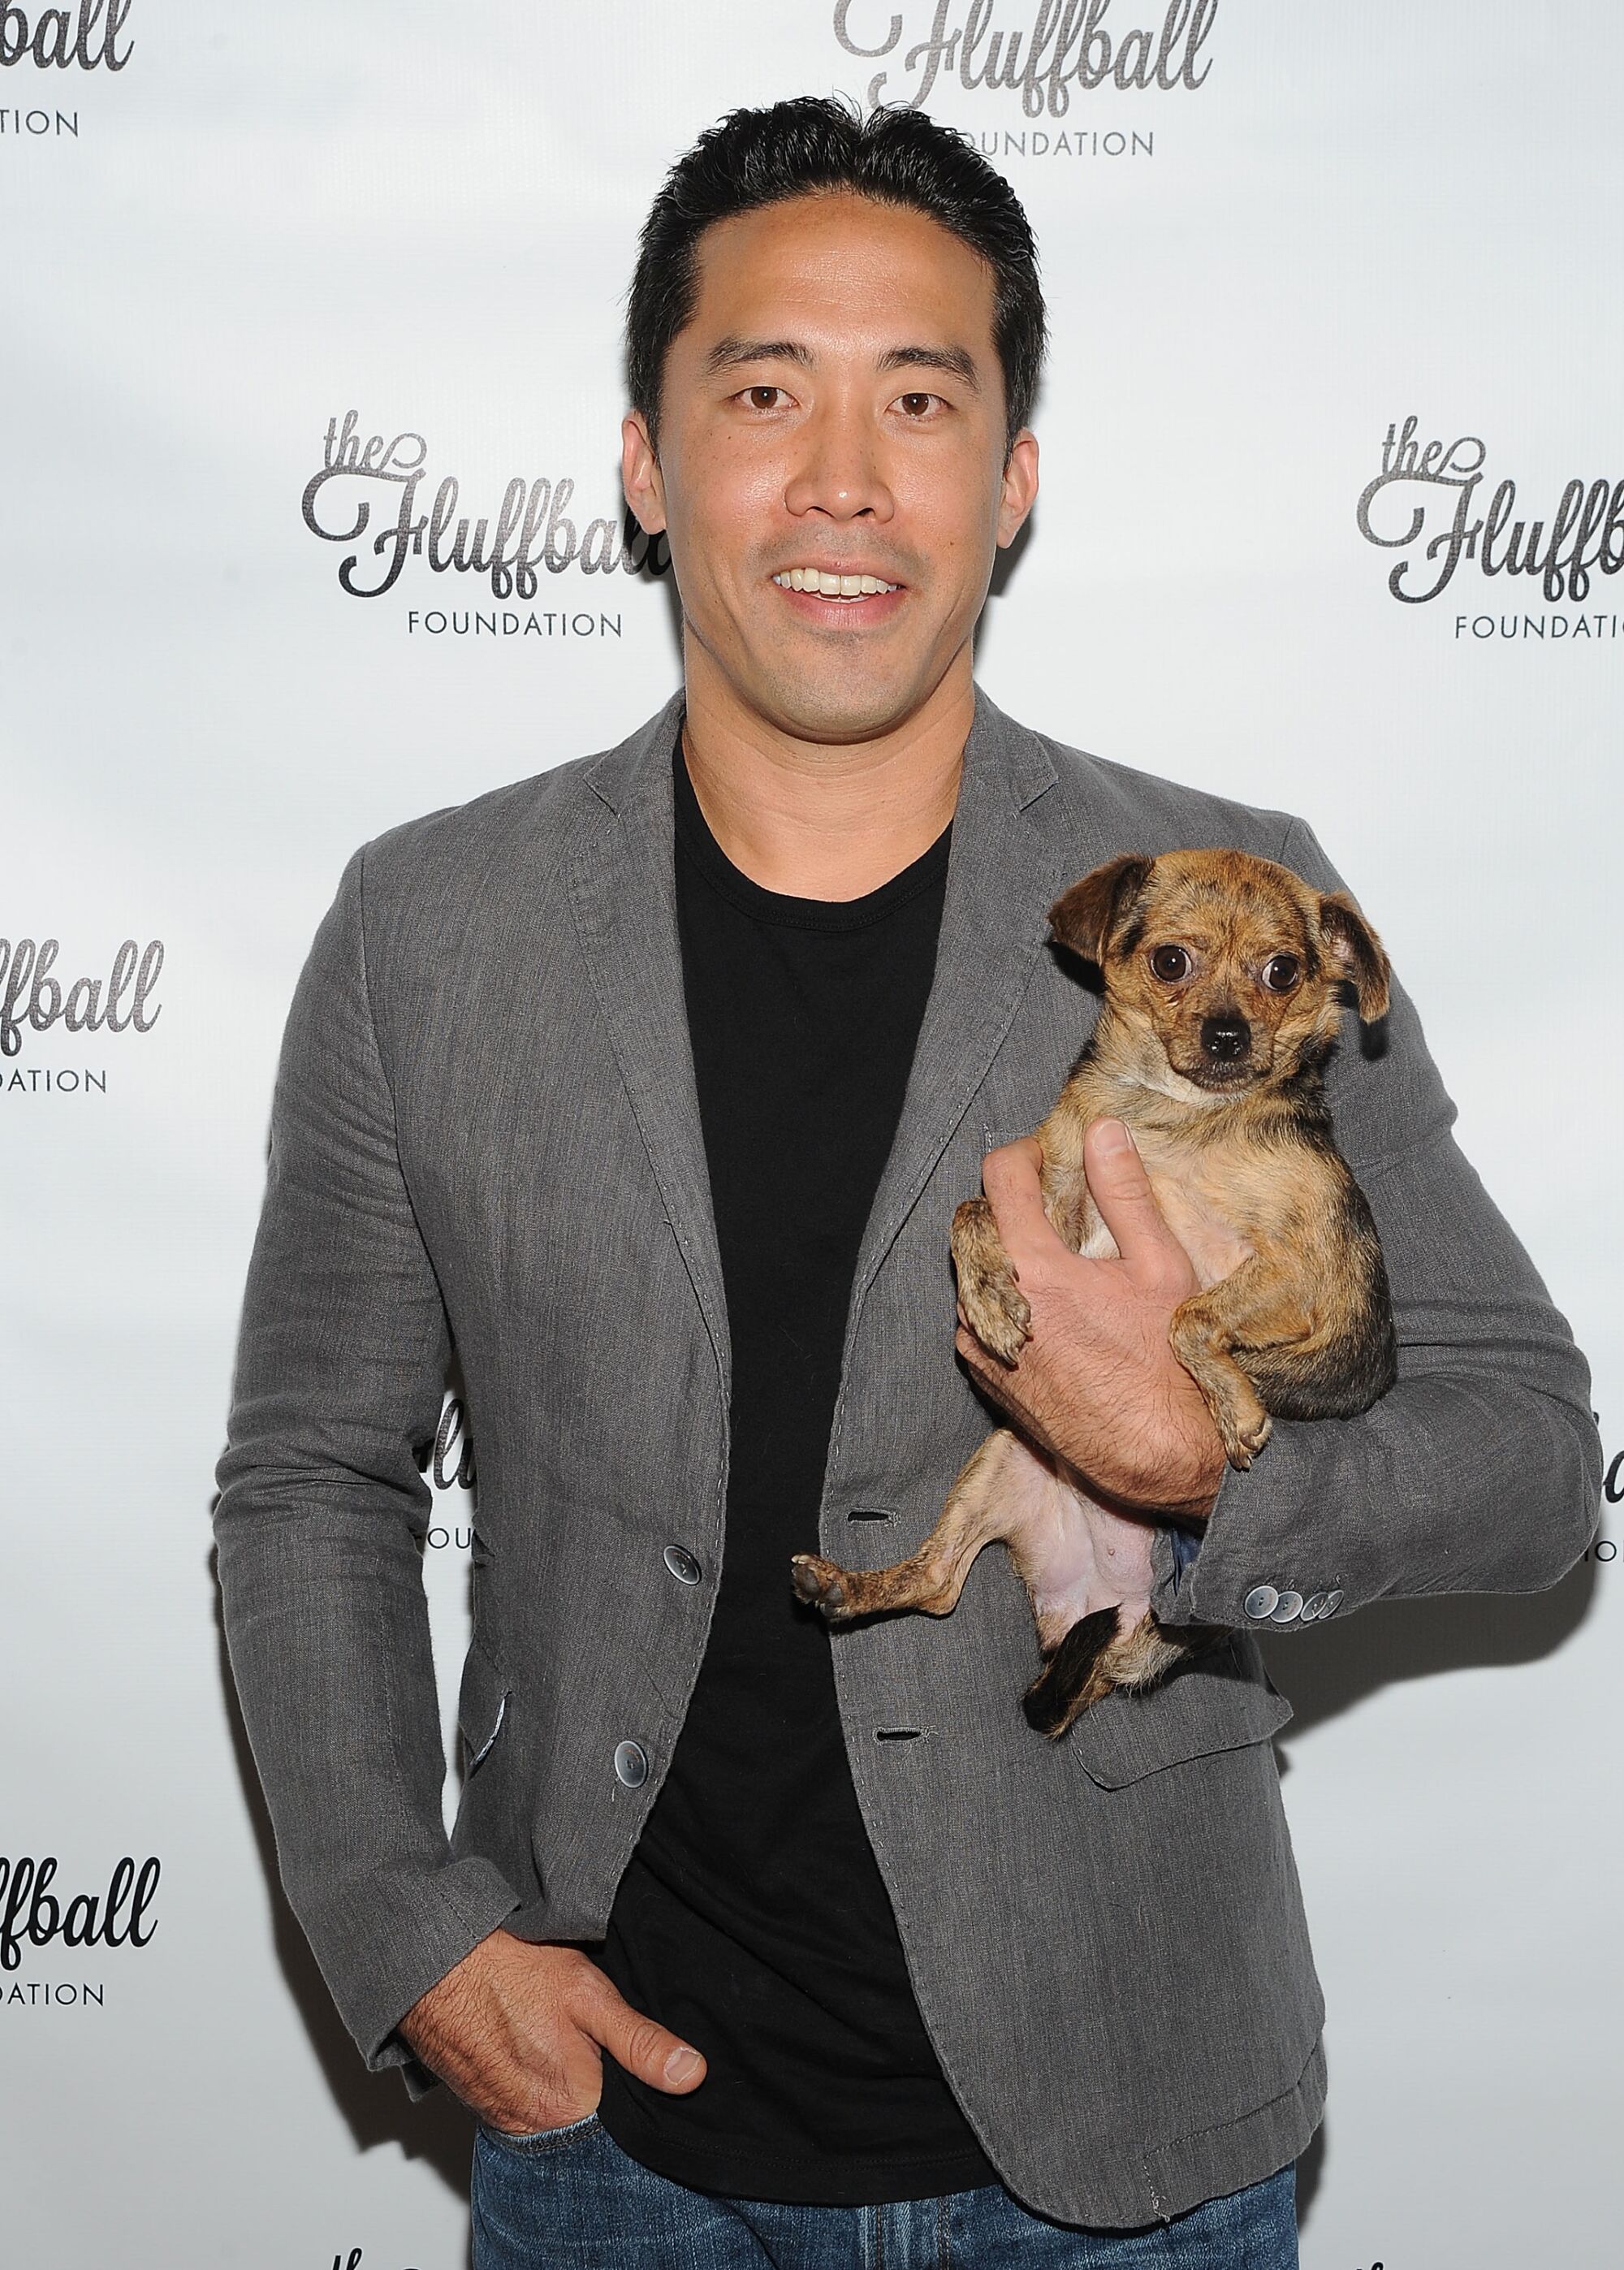 Marc Ching at a 2015 fundraiser event